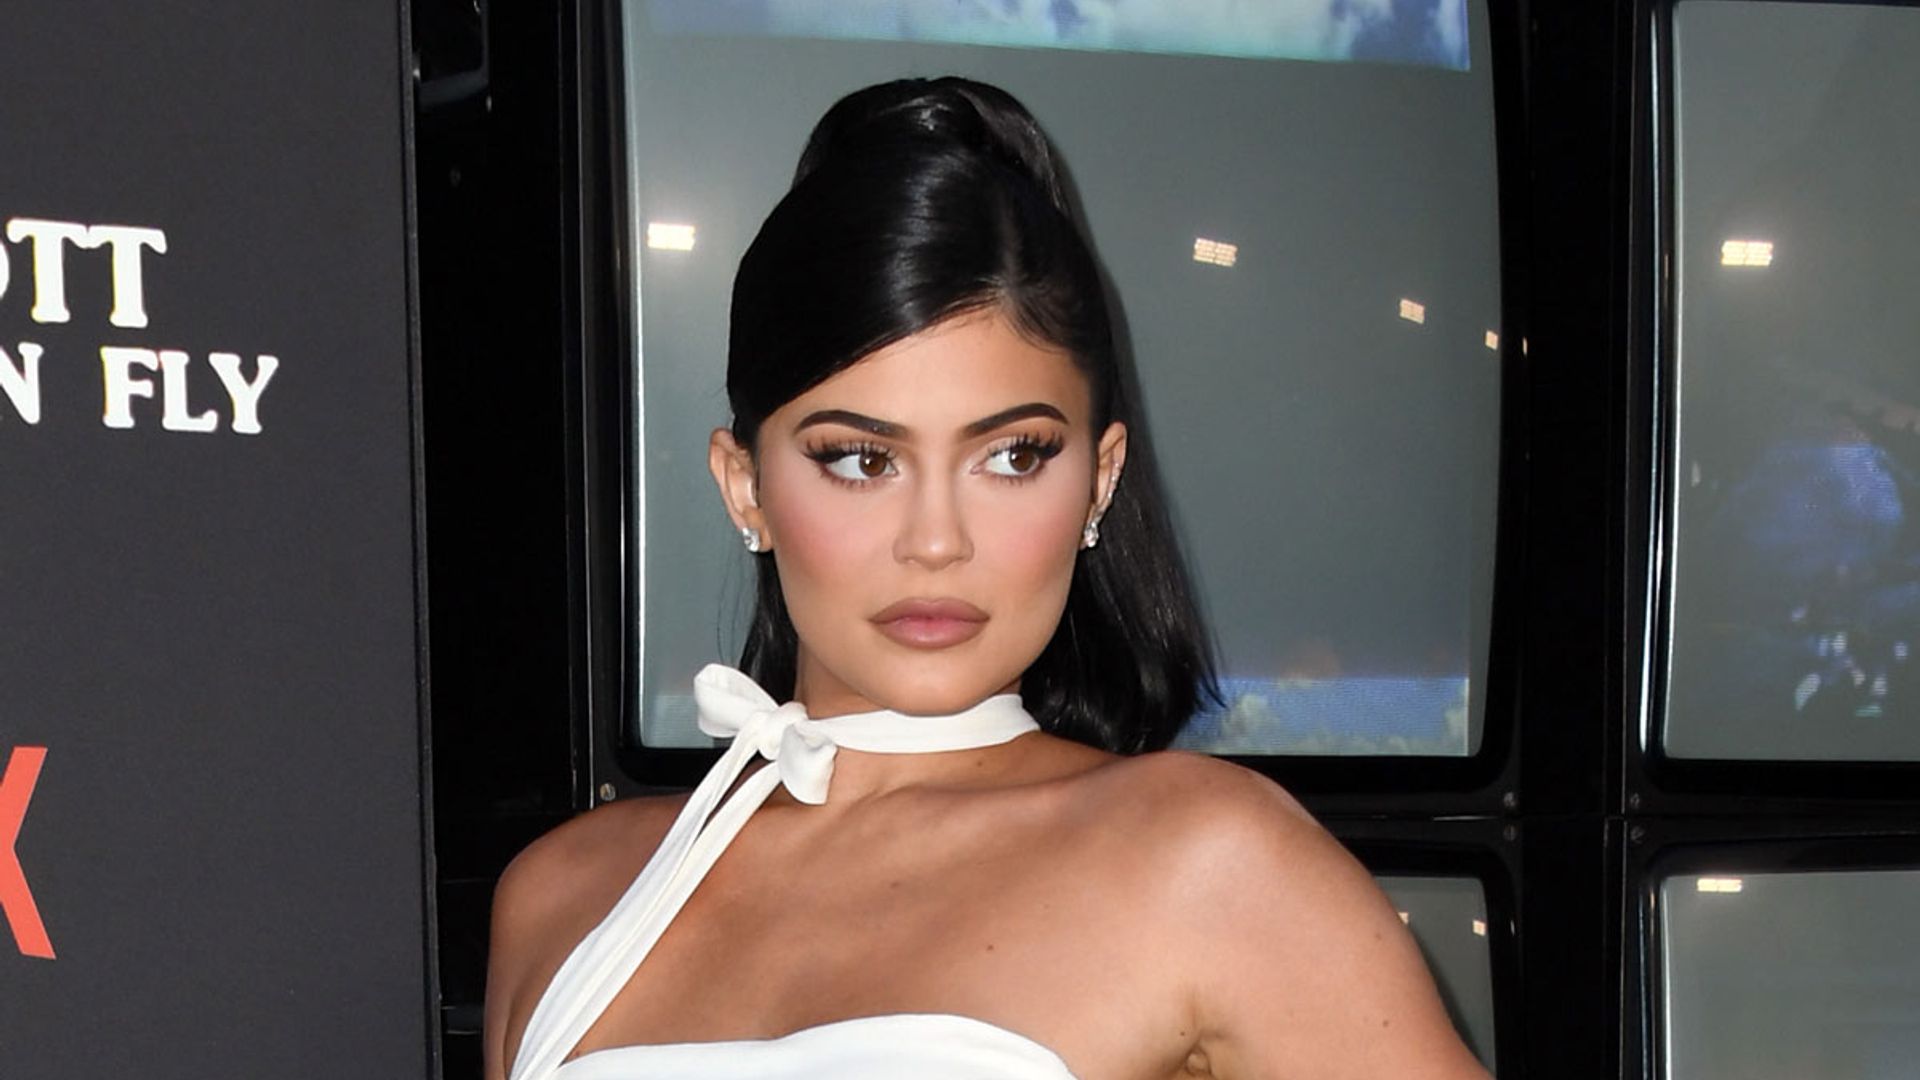 Kylie Jenner pictured with second bridal gown and sparkling diamond ring